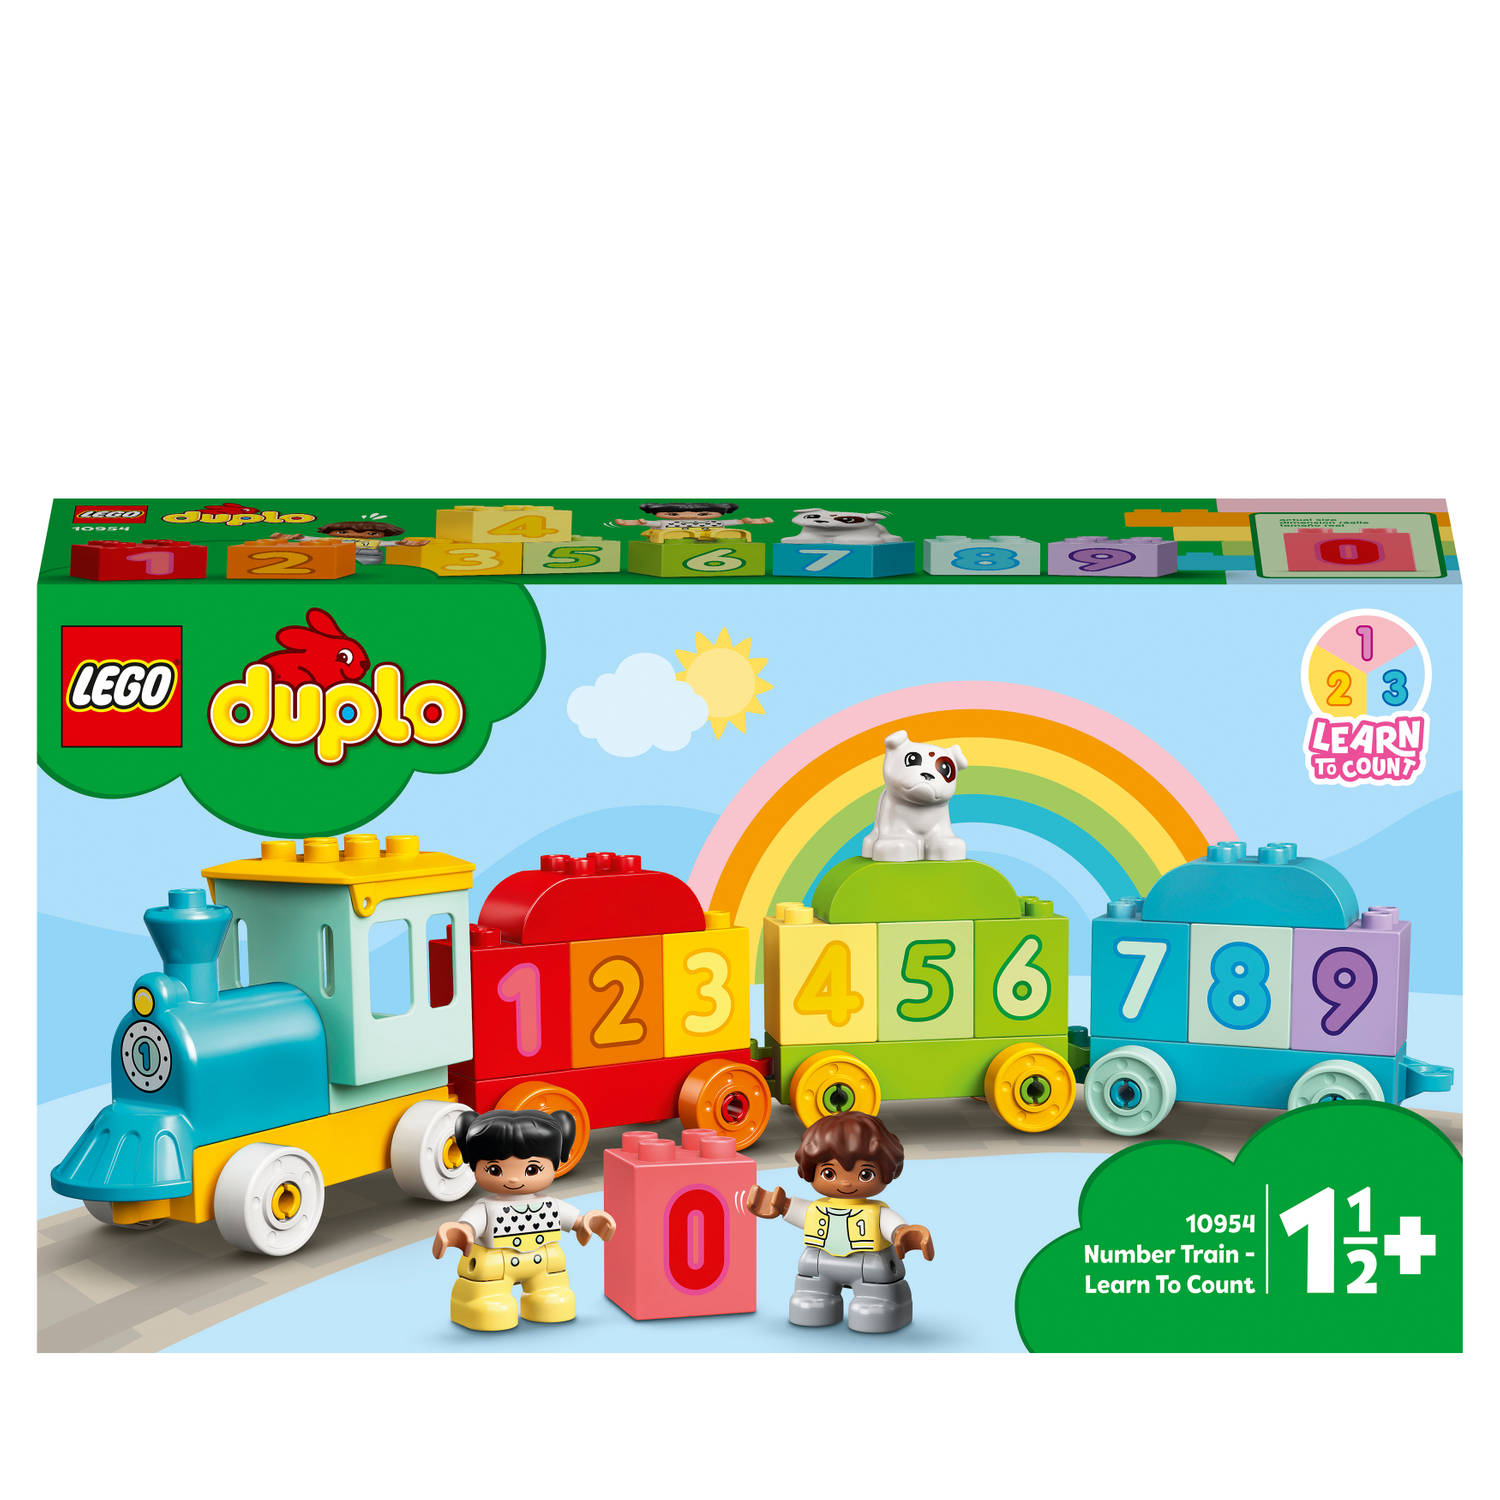 LEGO DUPLO 10954 Number Train Learn To Count